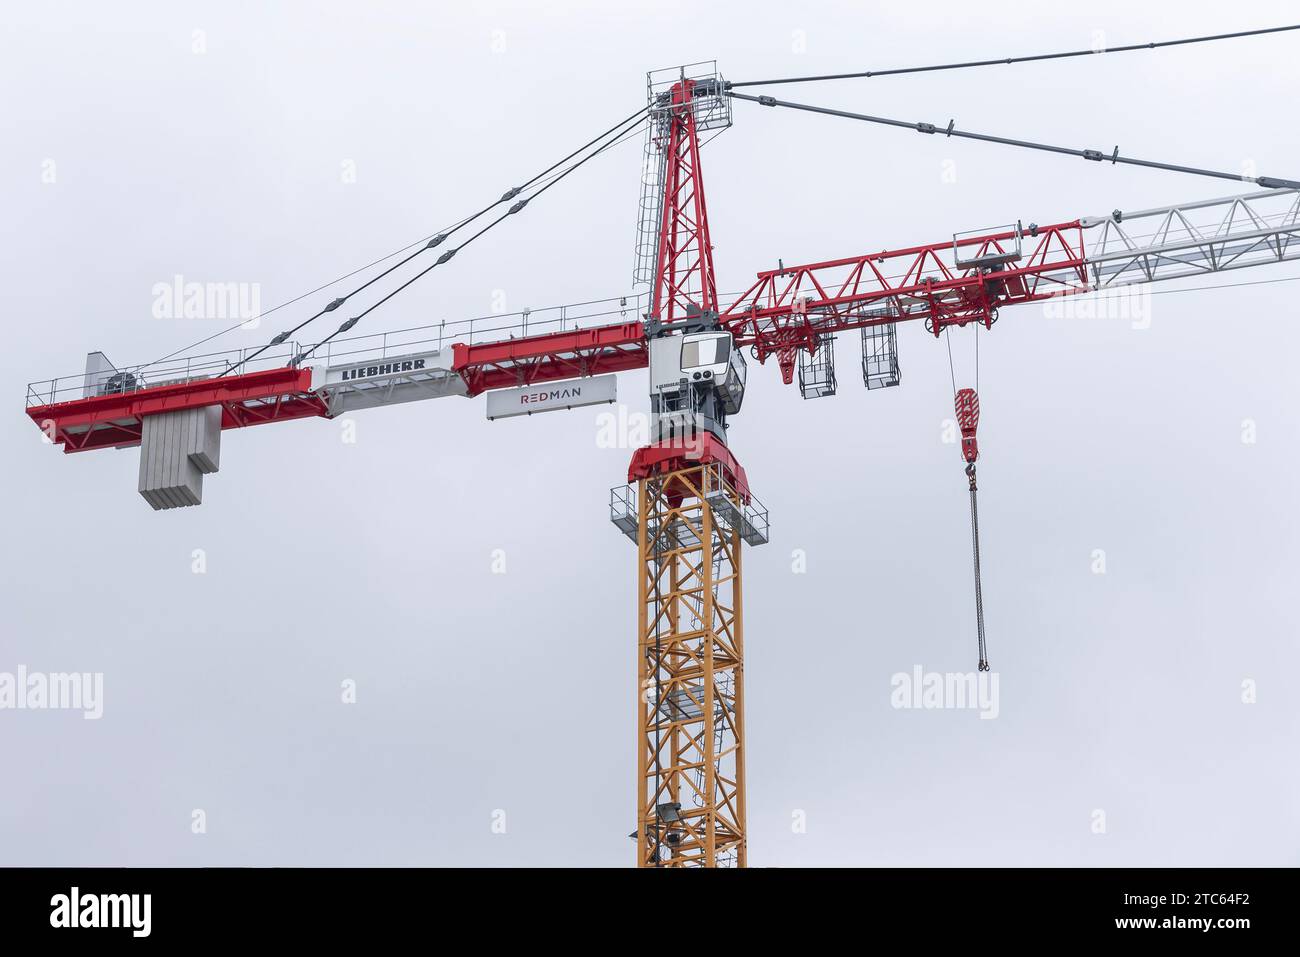 Paris, France - Red white and yellow tower crane Liebherr 630 EC-H 40 Litronic on a construction site. Stock Photo